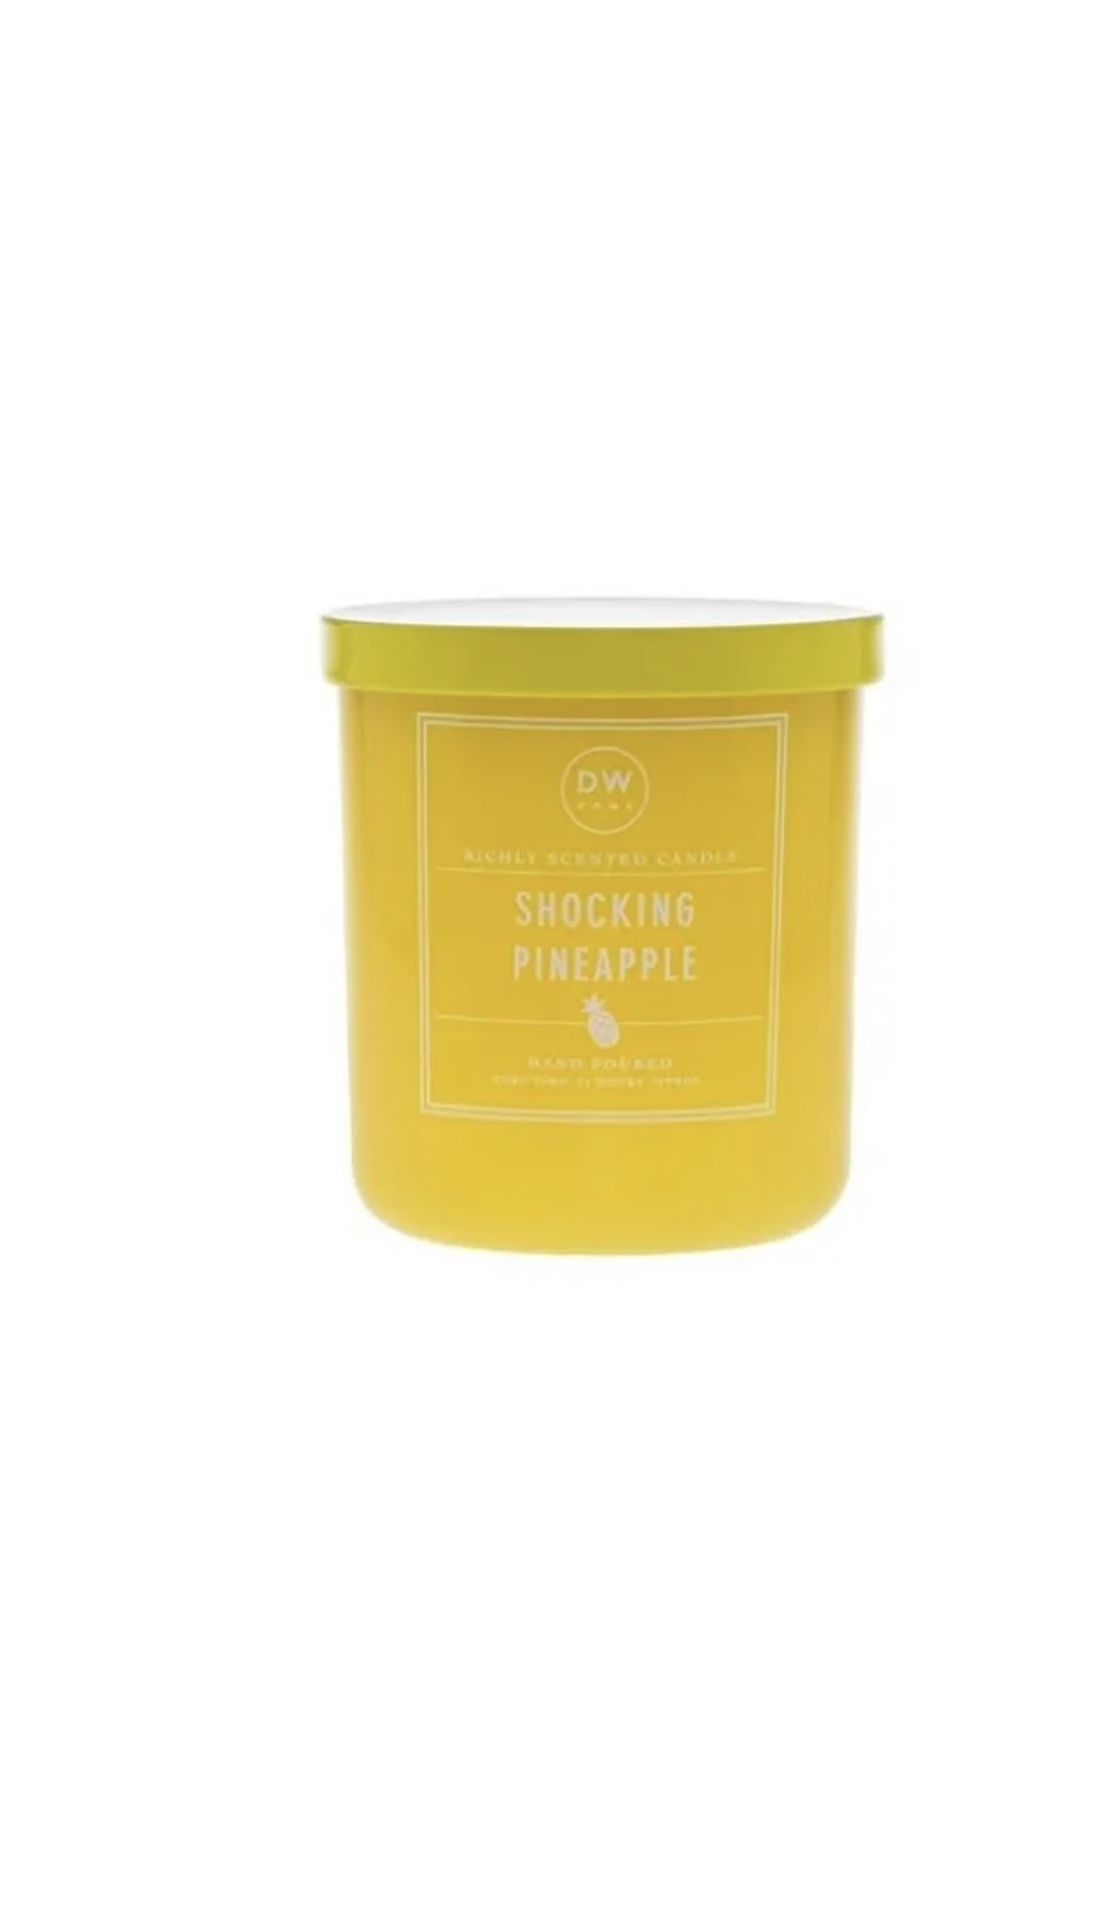 DW Home Candle SHOCKING PINEAPPLE 9.0 oz Single Wick